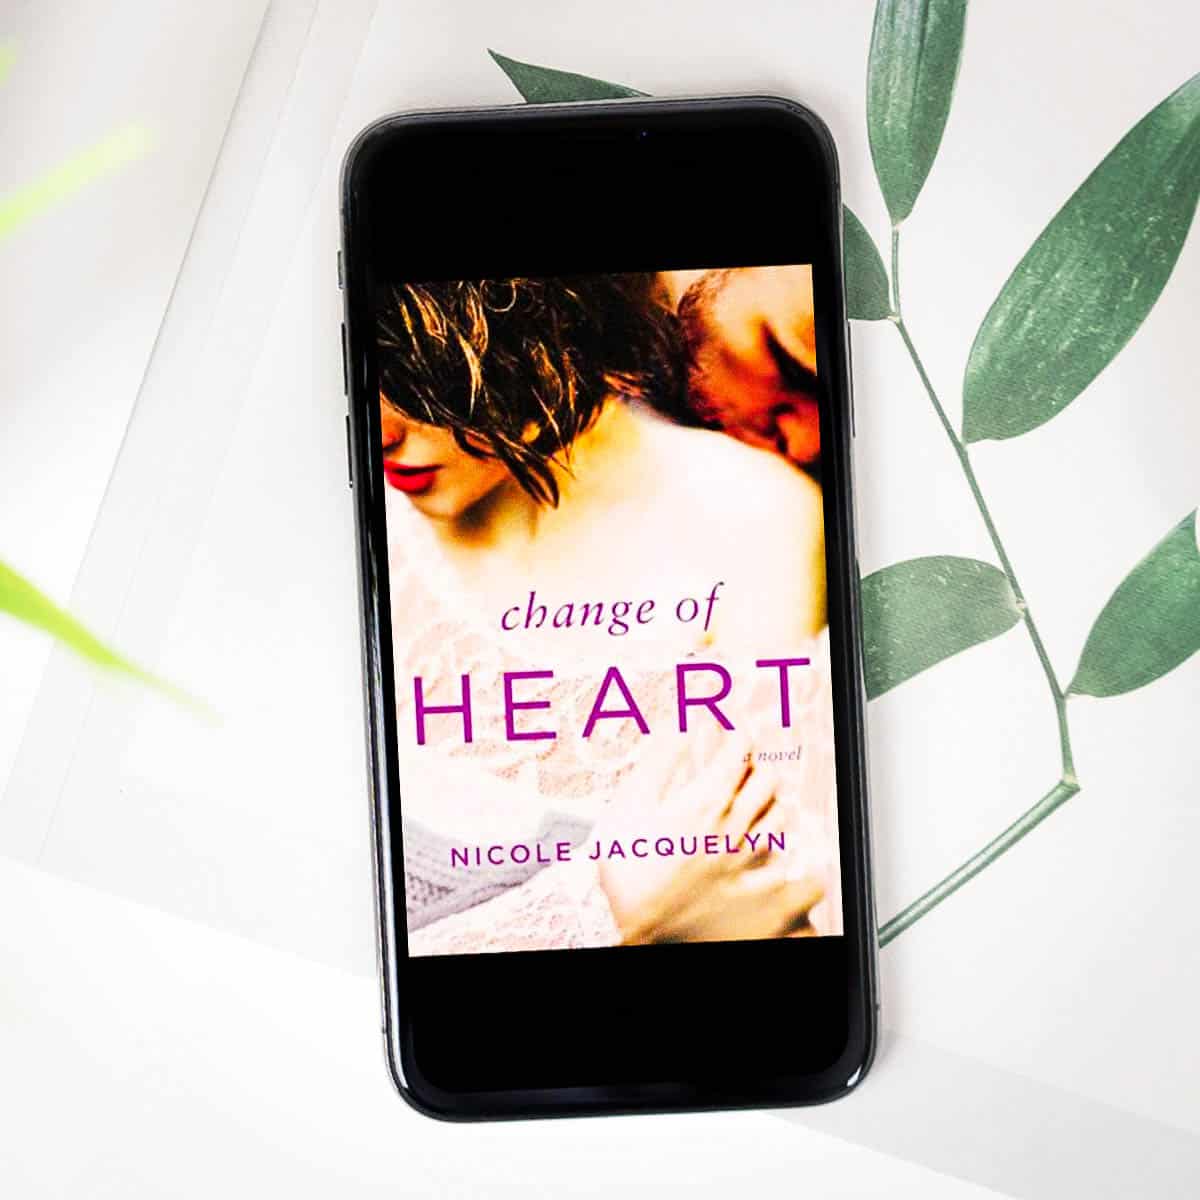 Change of Heart is a highly angsty and emotional enemies-to-lovers story about Anita and Abraham.  The story brings focus to the concept of family, whether formed through fostering, adoption, or blood.  